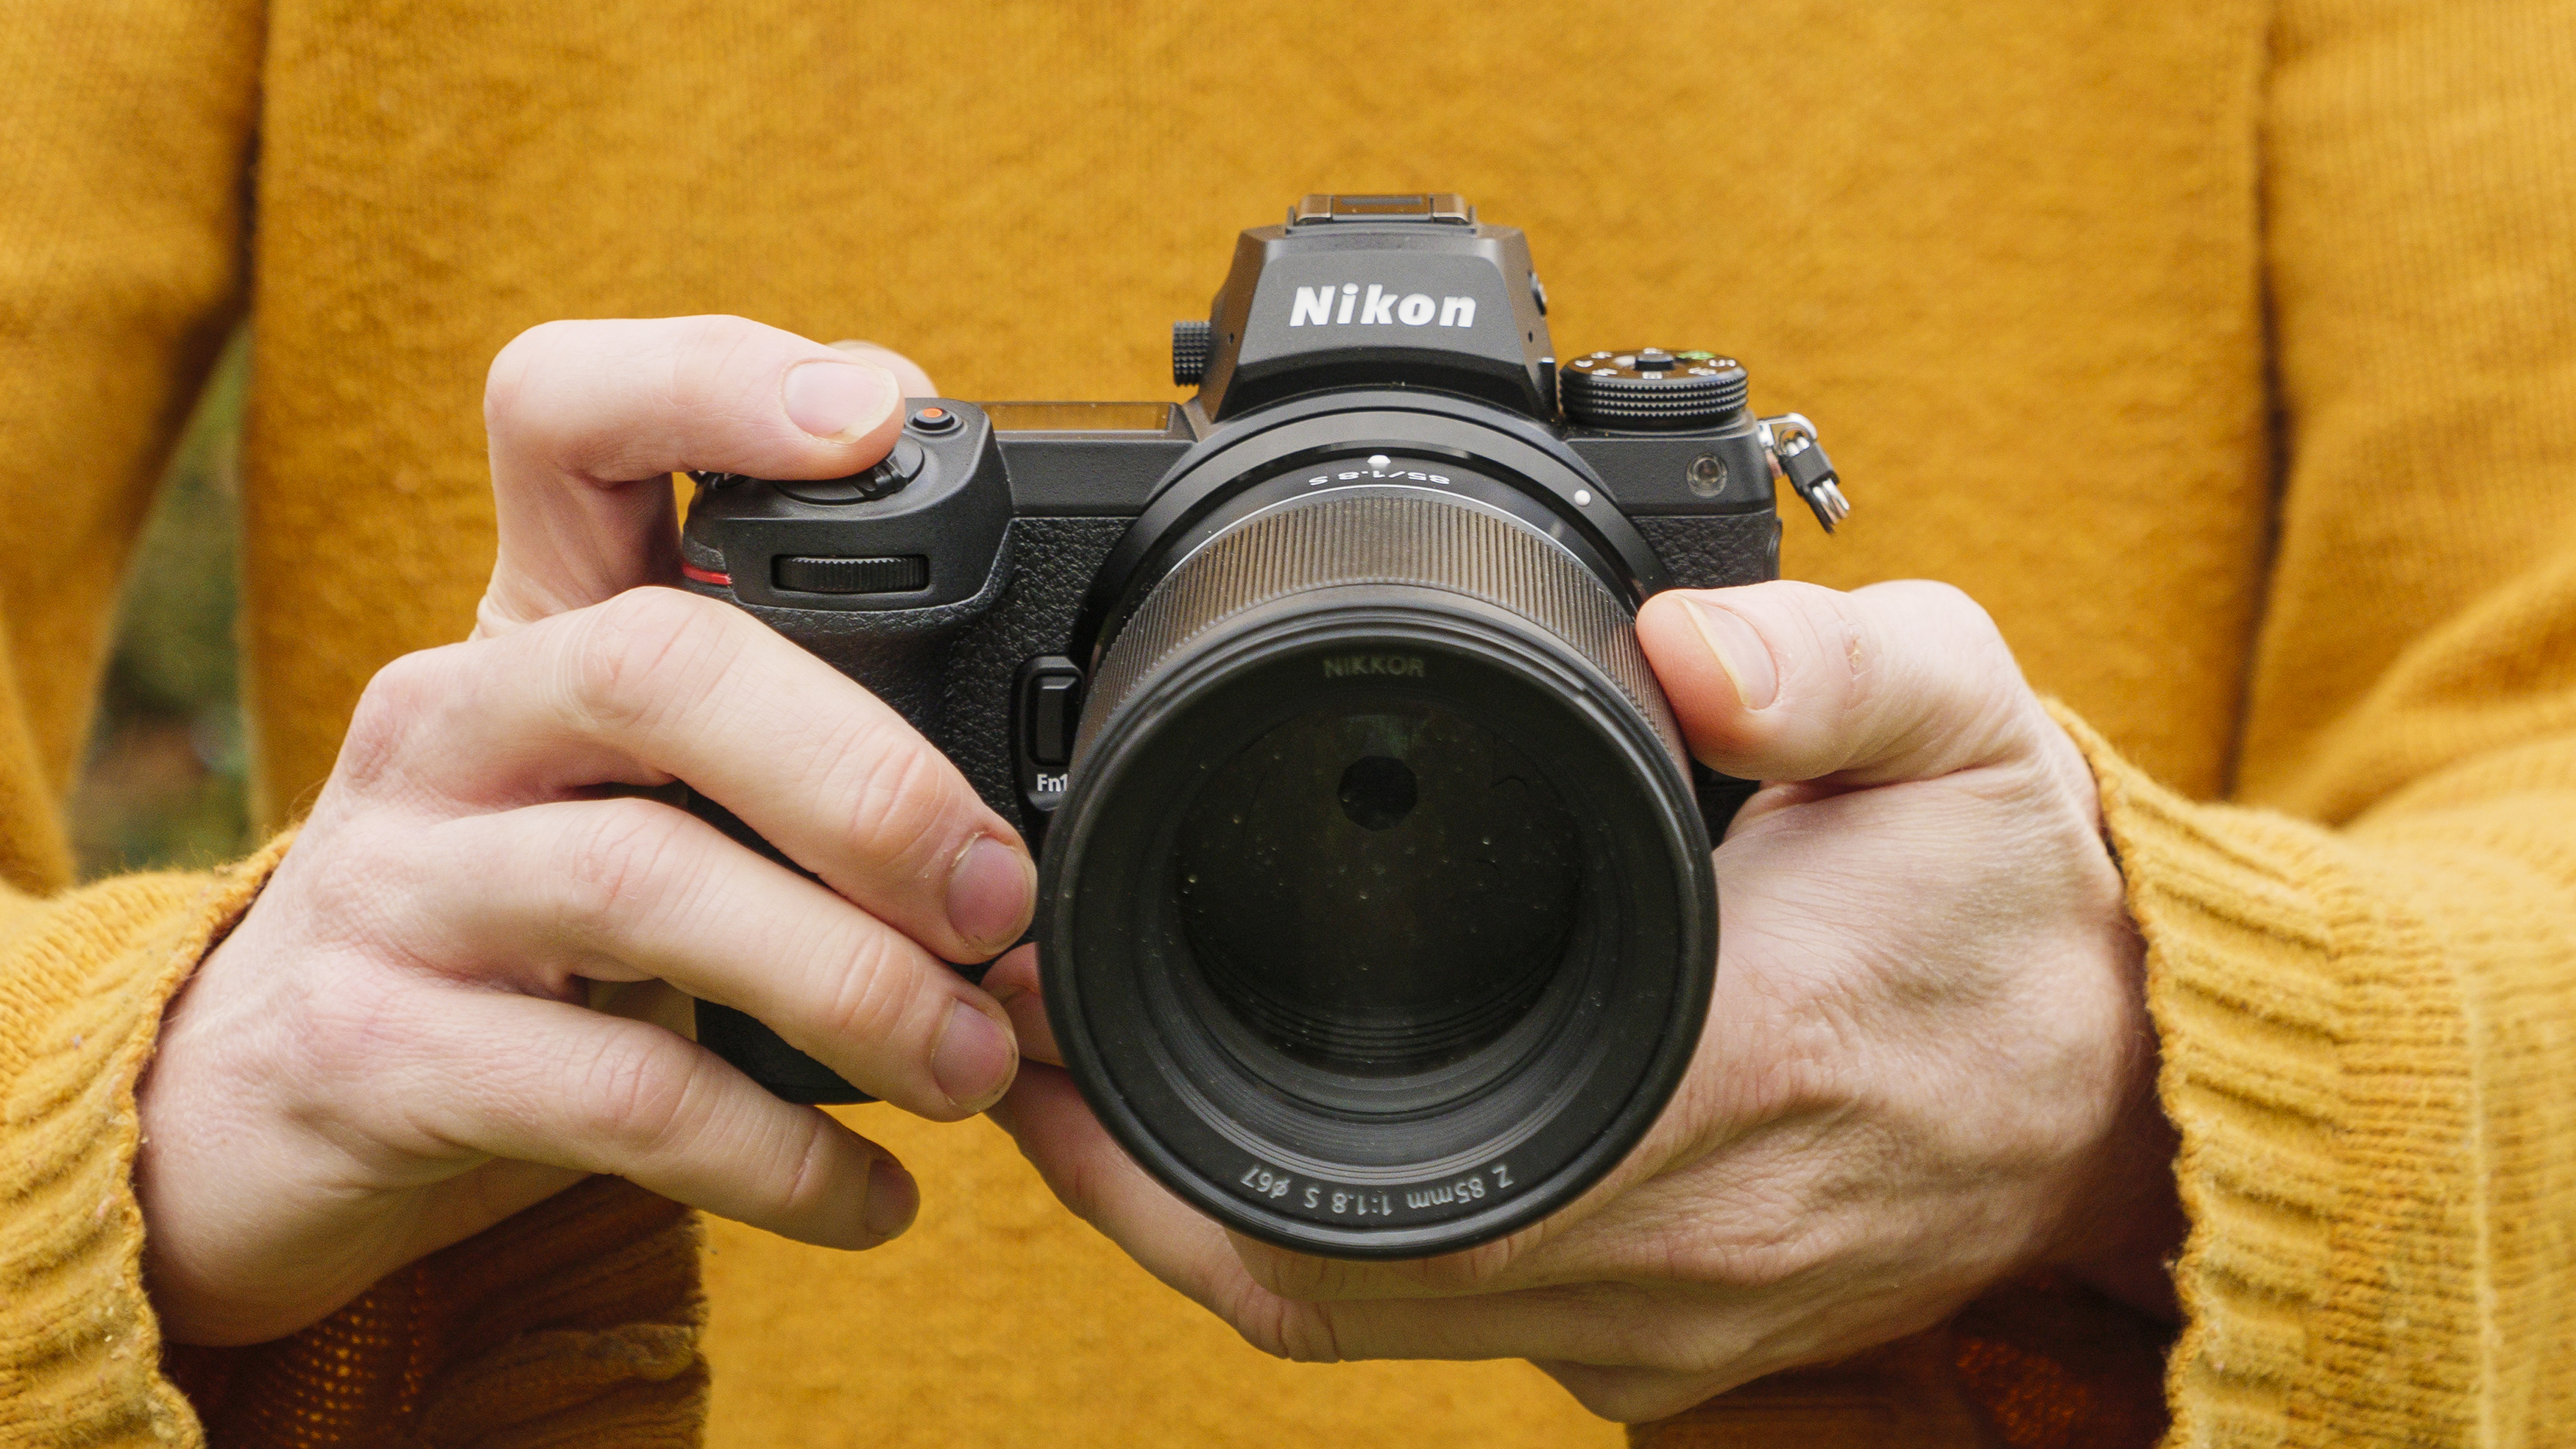 Hands holding the Nikon Z7 II with its Z 85mm f/1.8 lens